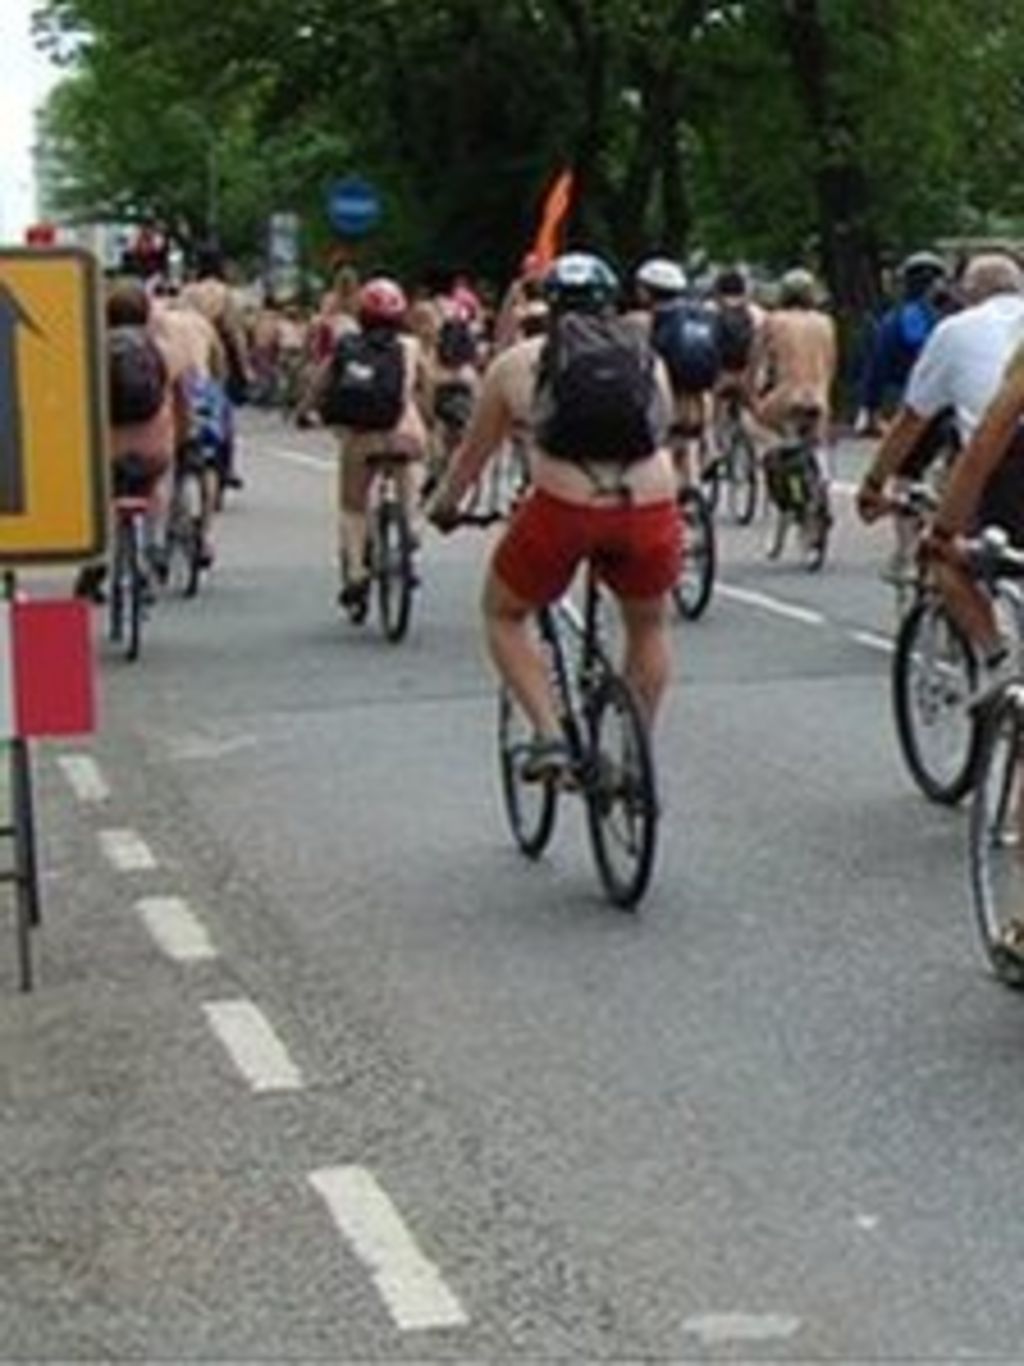 Brighton Nude Cyclists Ignore Police Advice To Cover Intimate Areas Bbc News